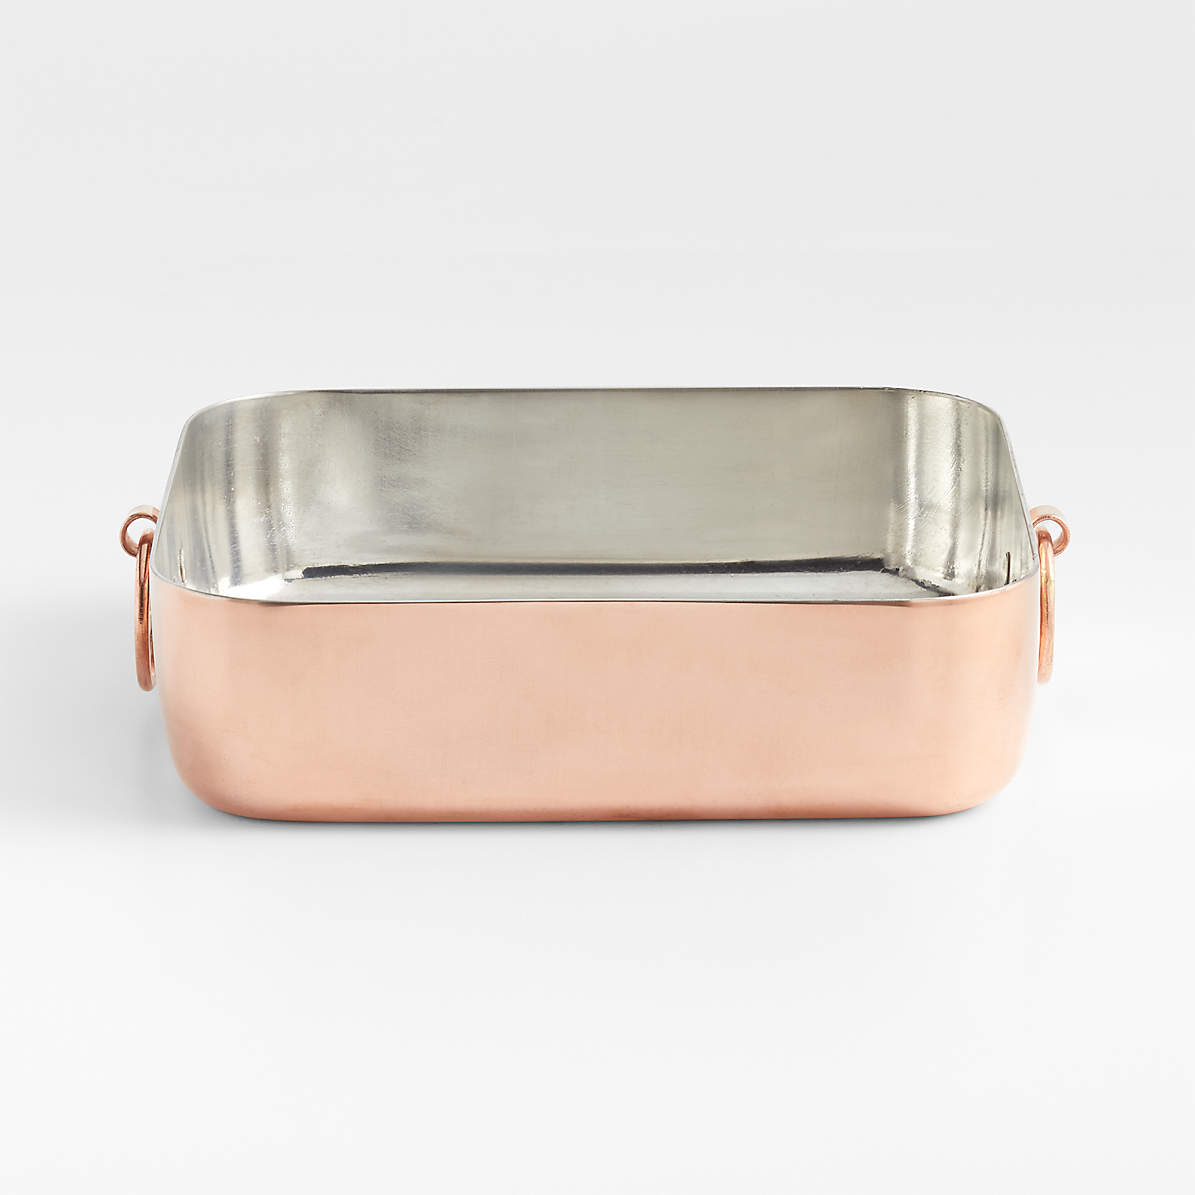 Coppermill Vintage-Inspired Square Baking Pan